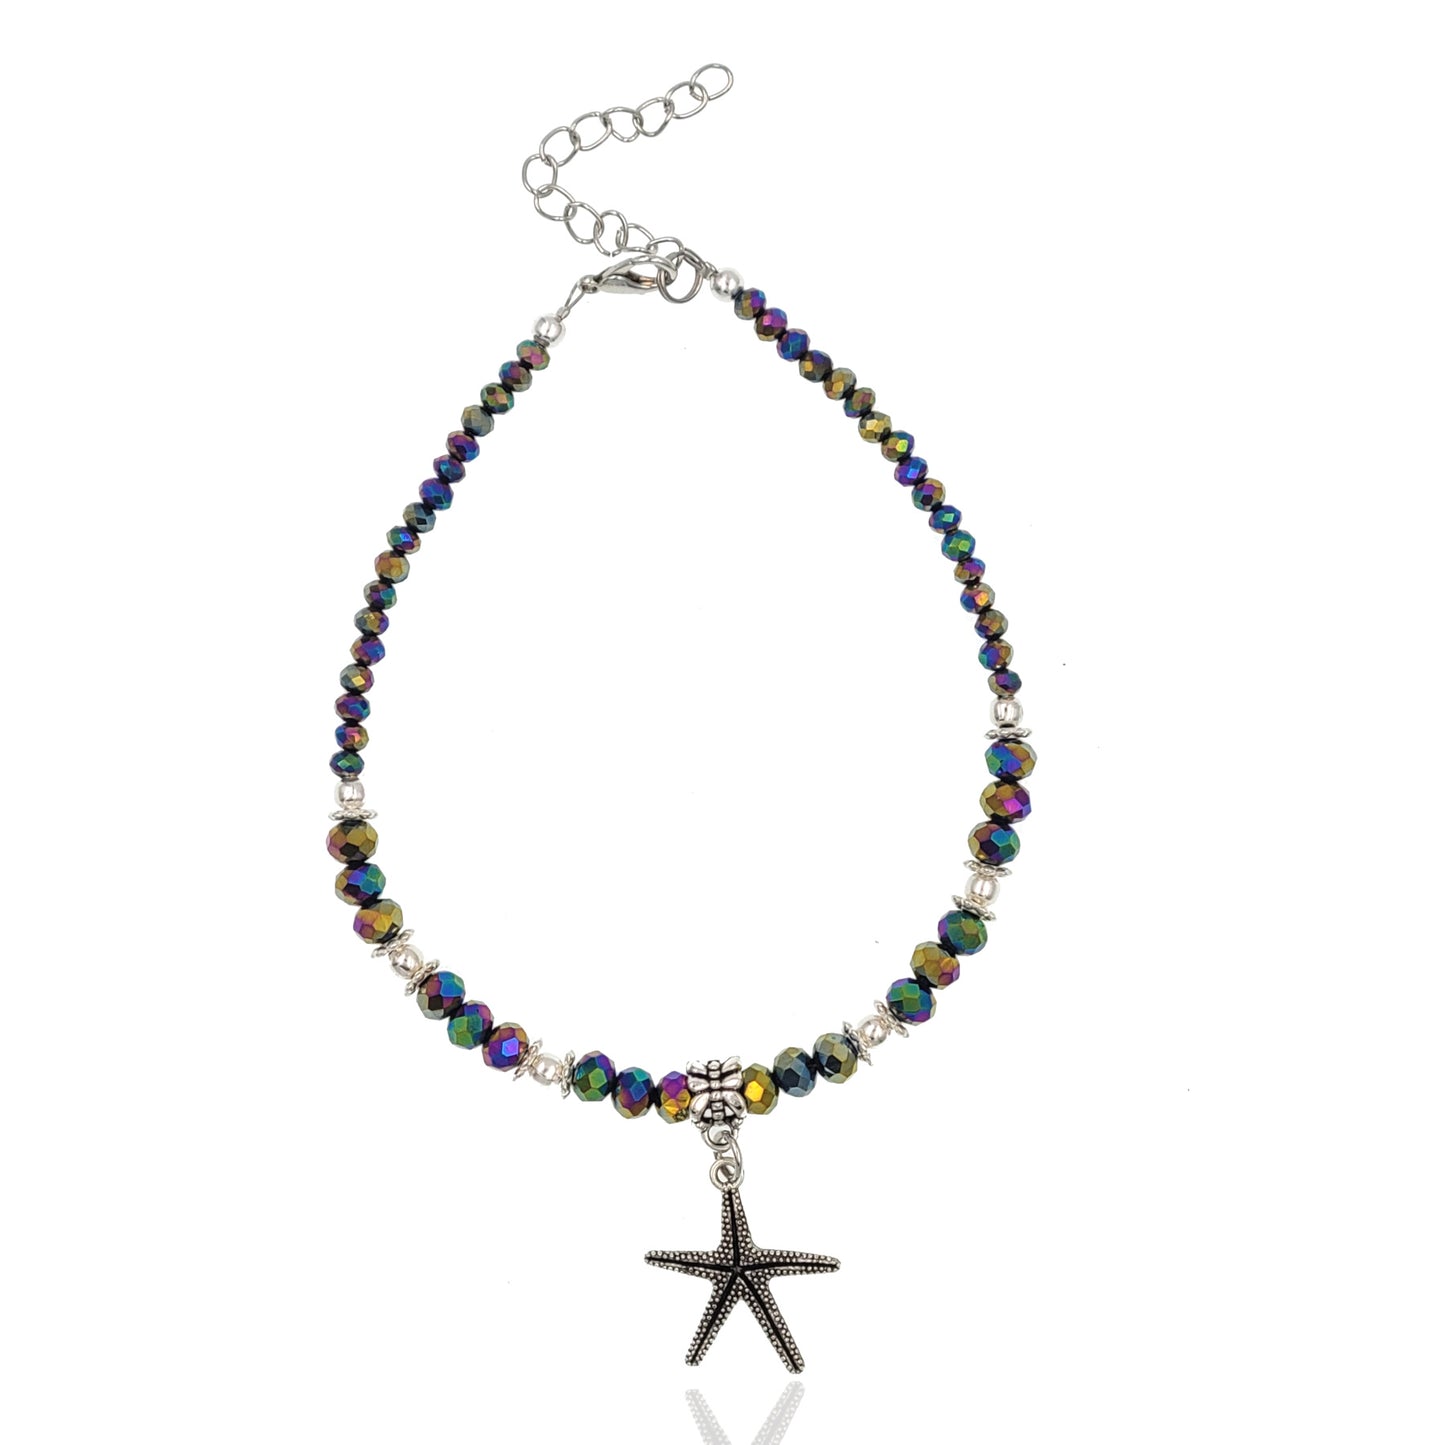 BESHEEK Starfish RAINBOW Hue Faceted Crystal Glass Artisan Beaded Anklet with Extension | Handmade Hypoallergenic Beach Gala Wedding Style Jewelry